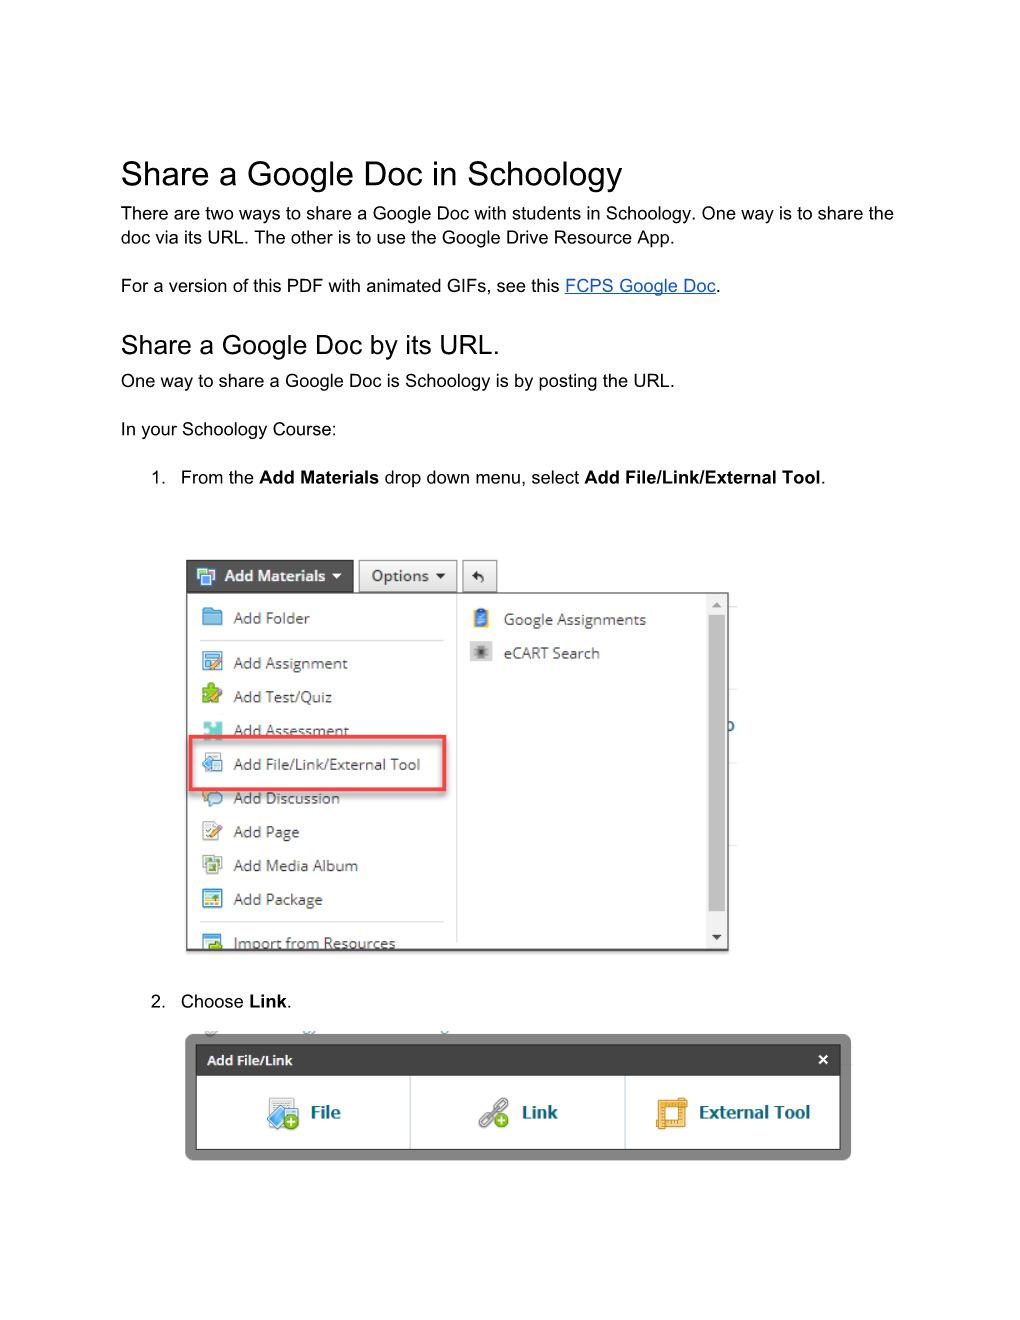 Share a Google Doc in Schoology There Are Two Ways to Share a Google Doc with Students in Schoology